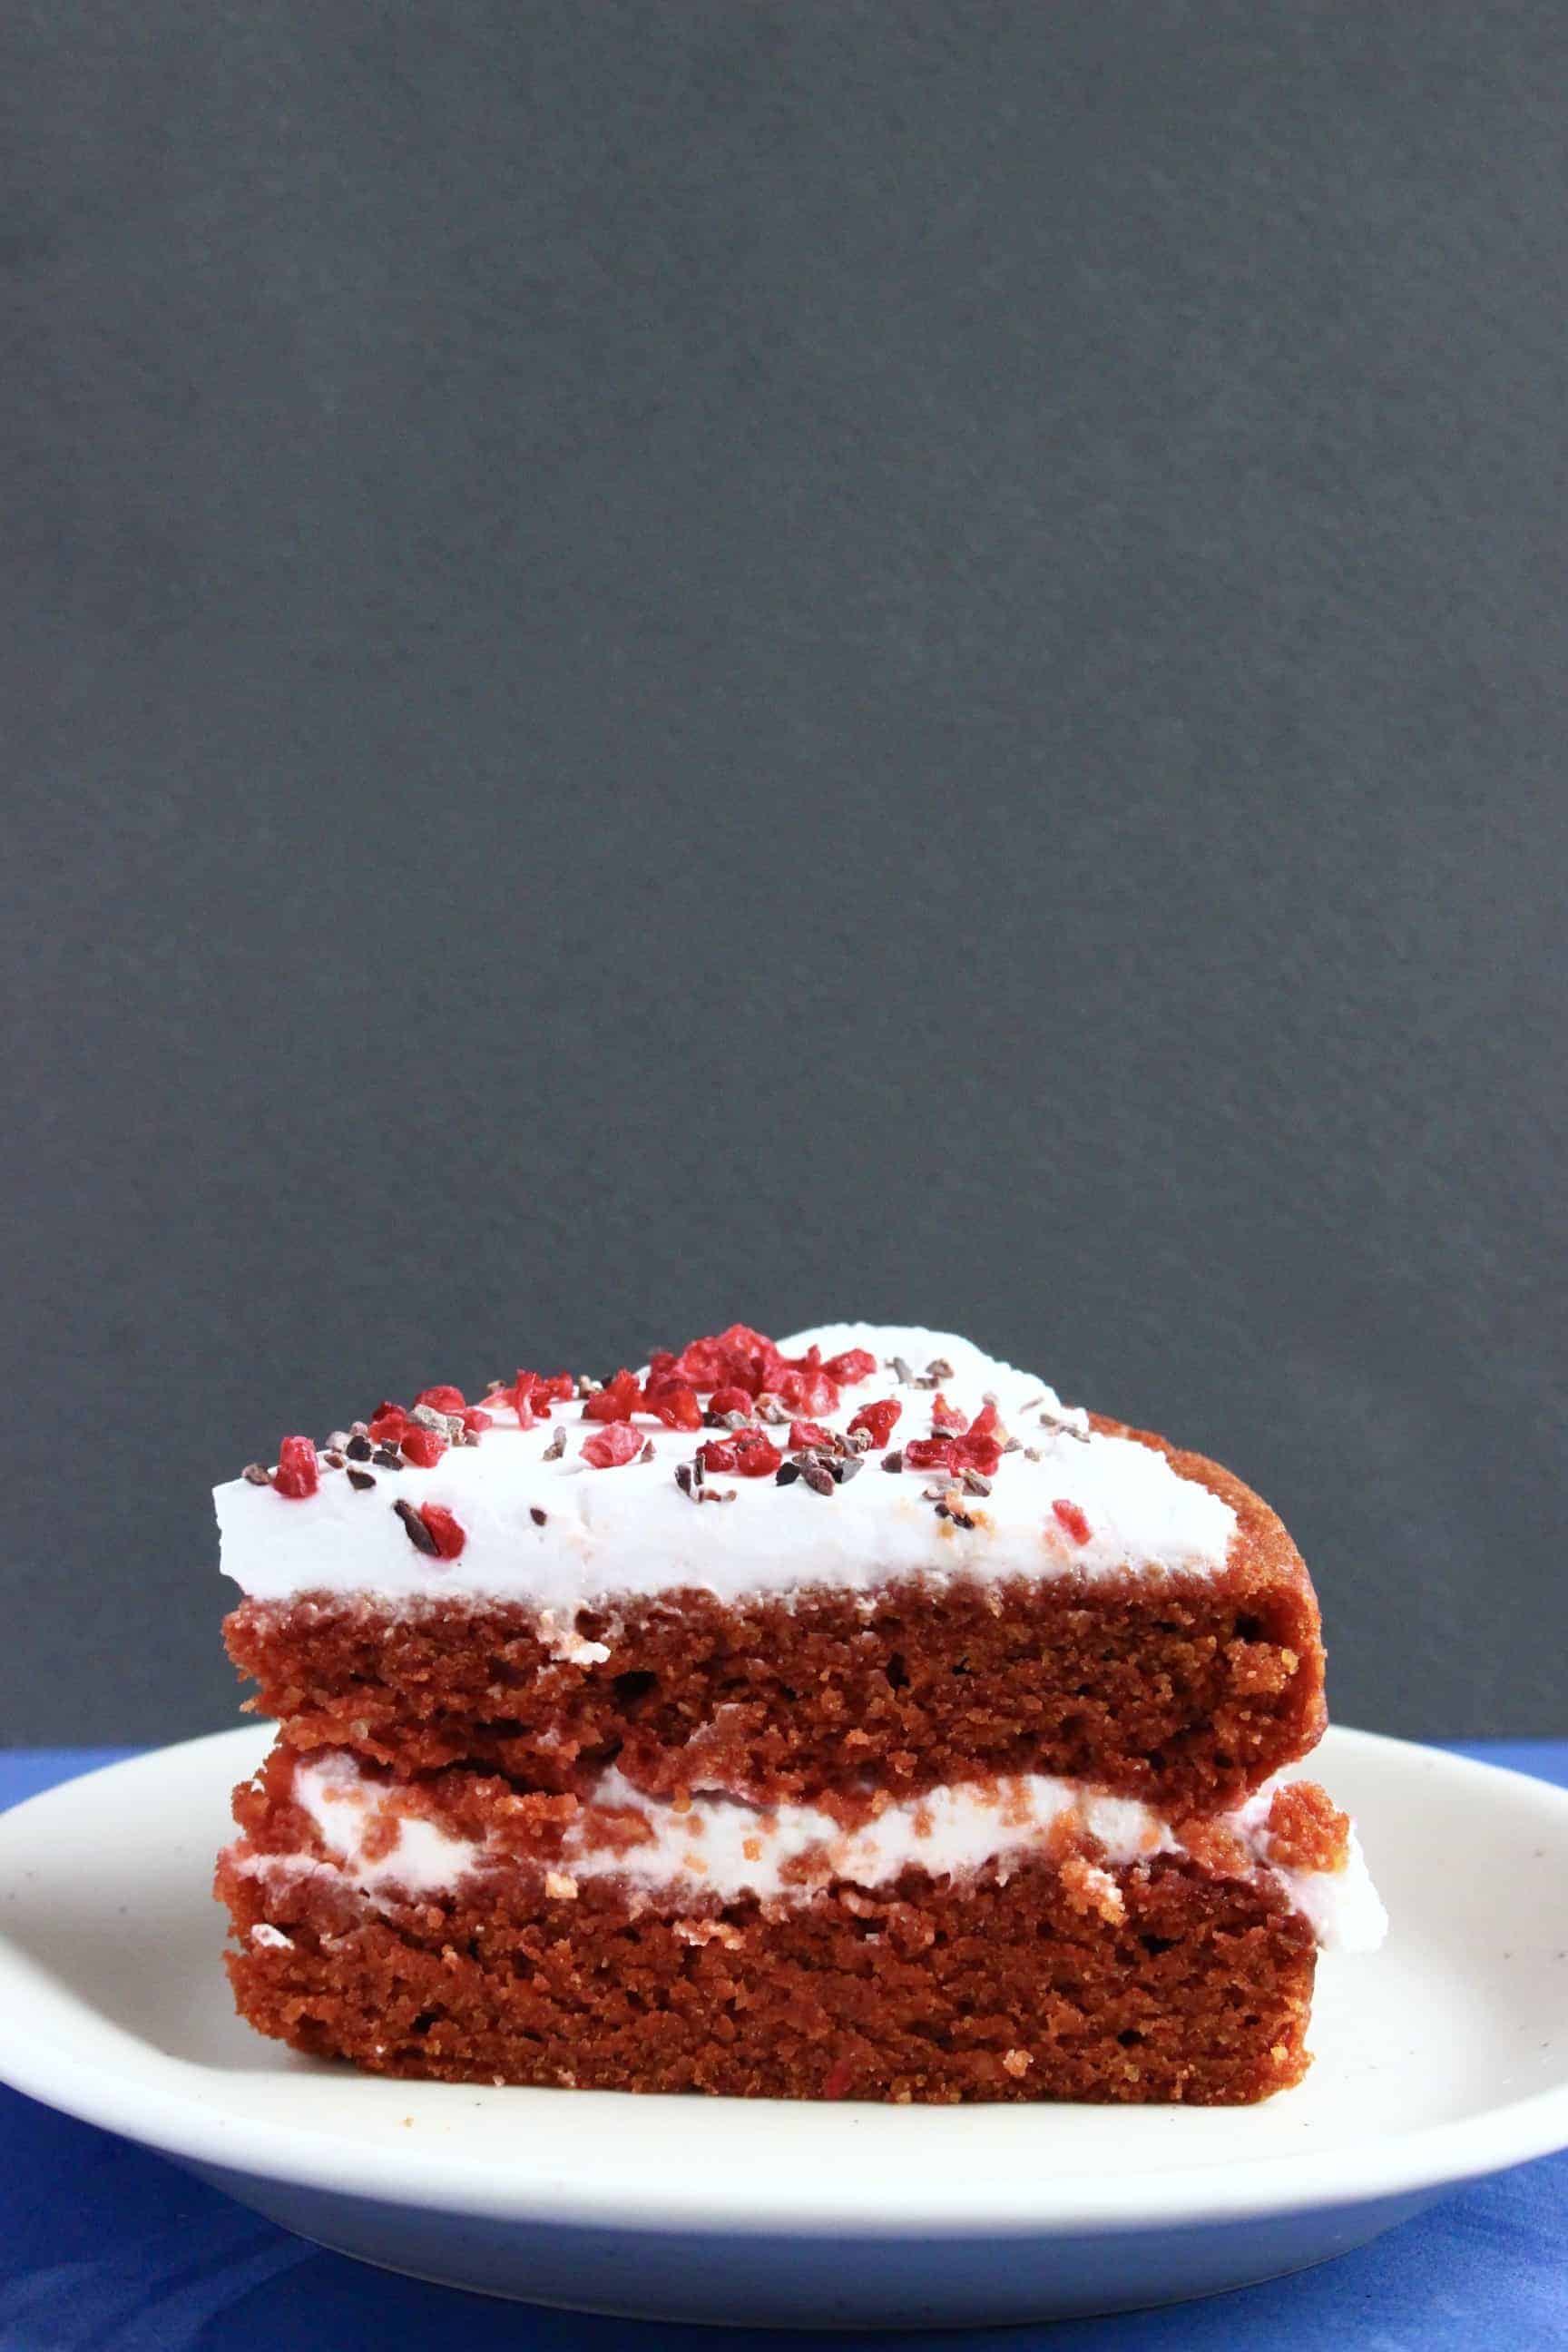 A slice of gluten-free vegan red velvet cake on a white plate against a grey background